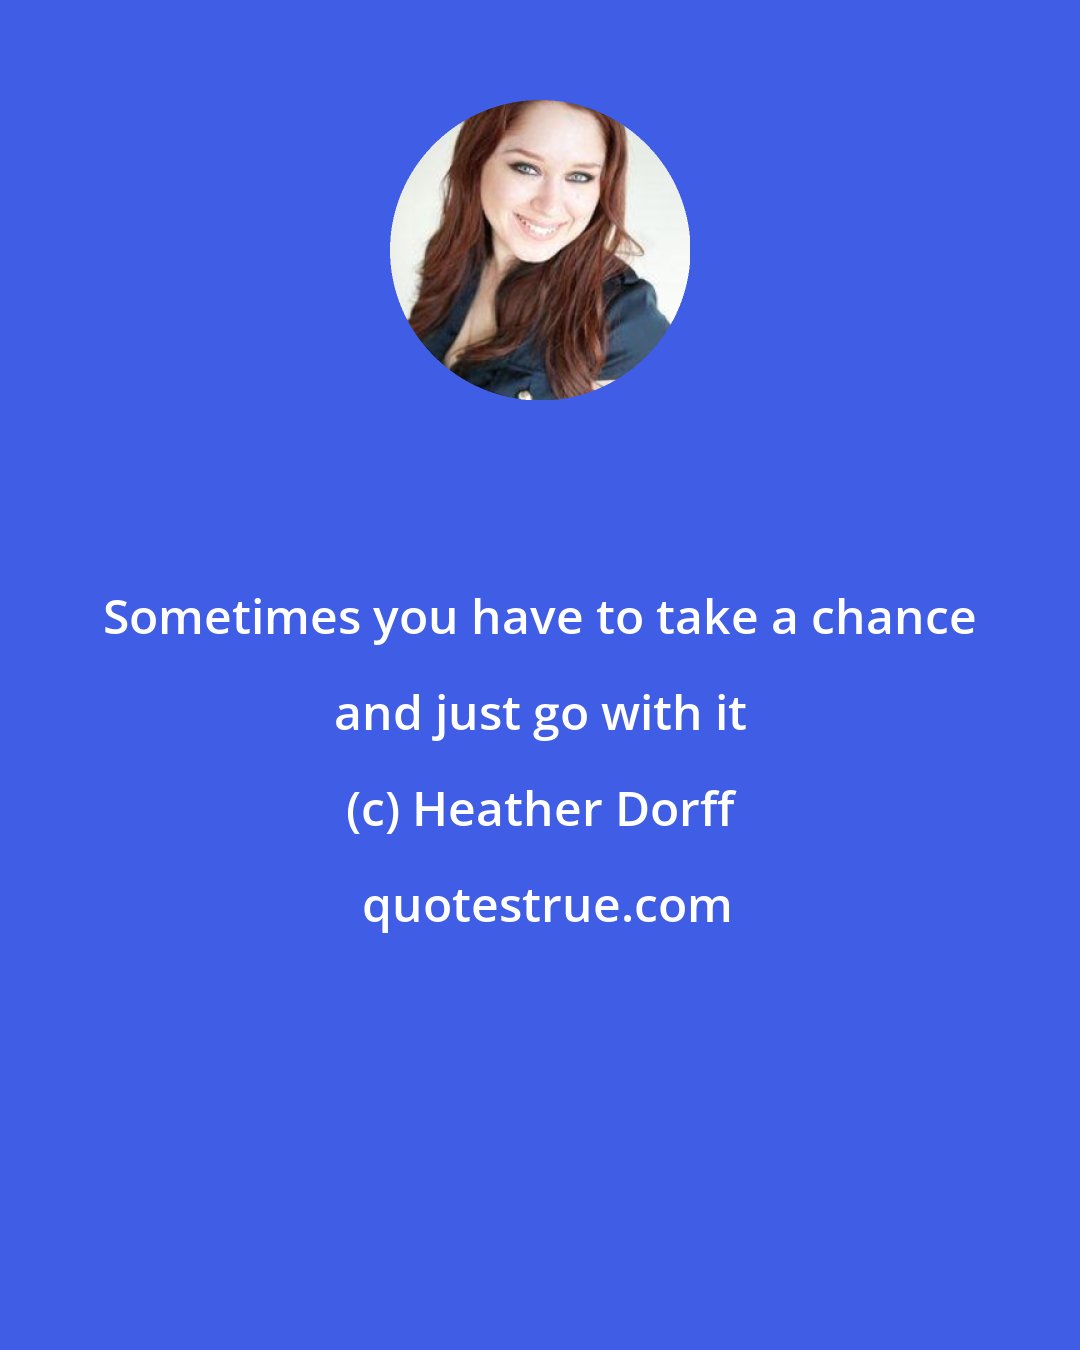 Heather Dorff: Sometimes you have to take a chance and just go with it